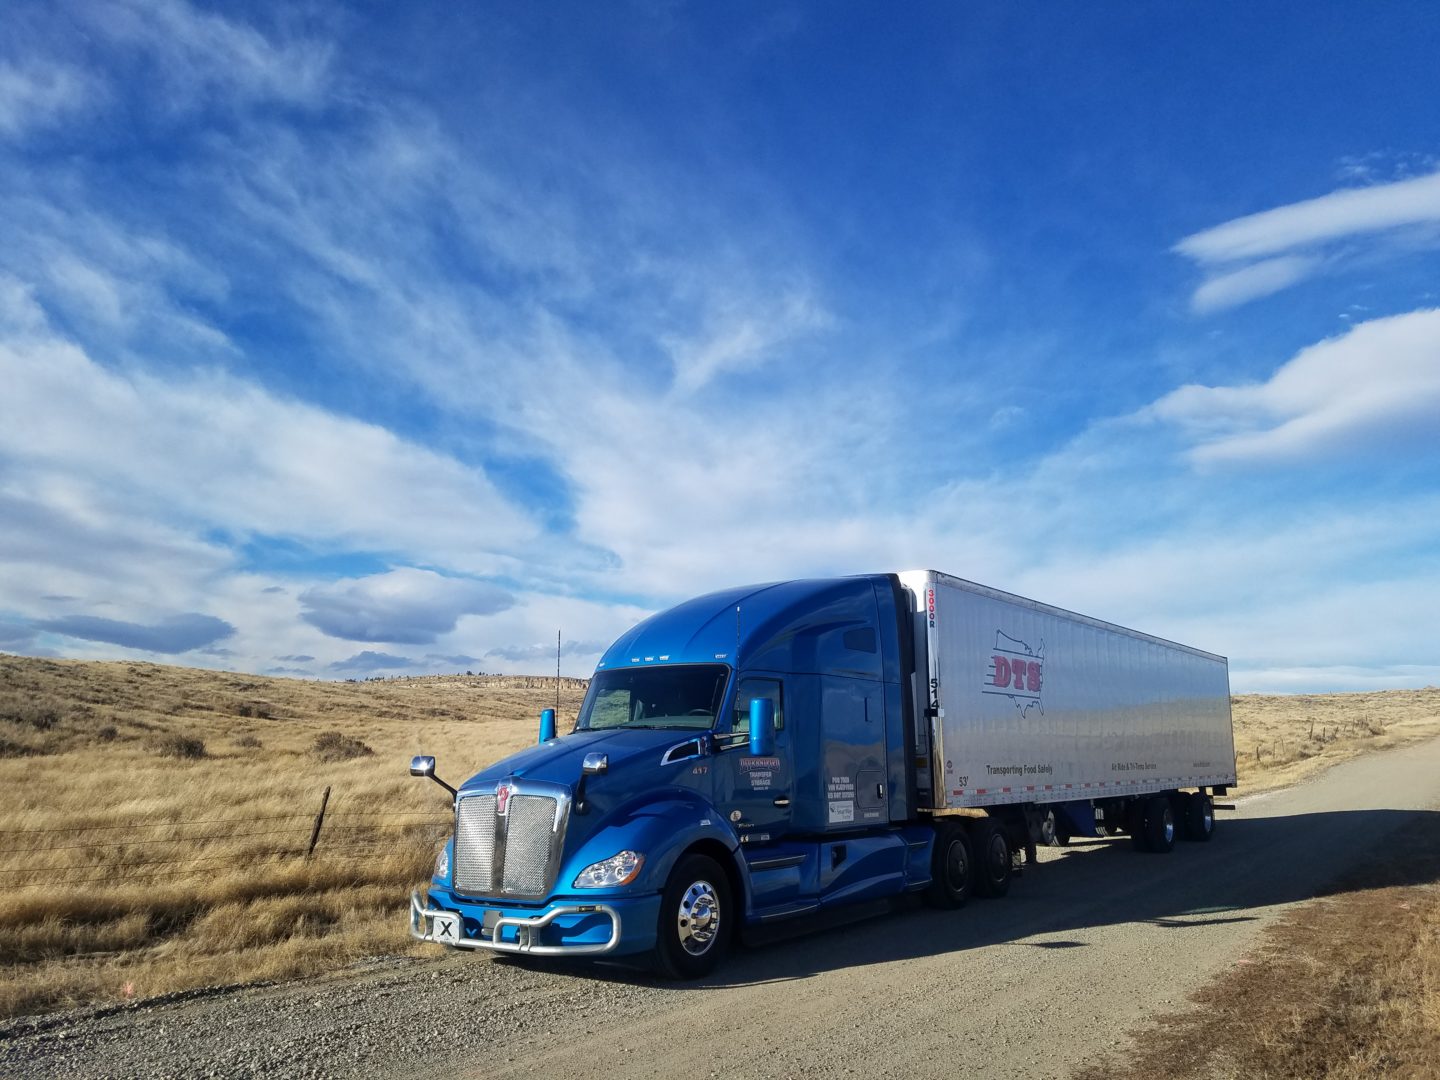 Picture of the left side of a blue Kenworth Semi-truck pulling a DTS reefer trailer on a dirt road, in the country, with blue skies above.